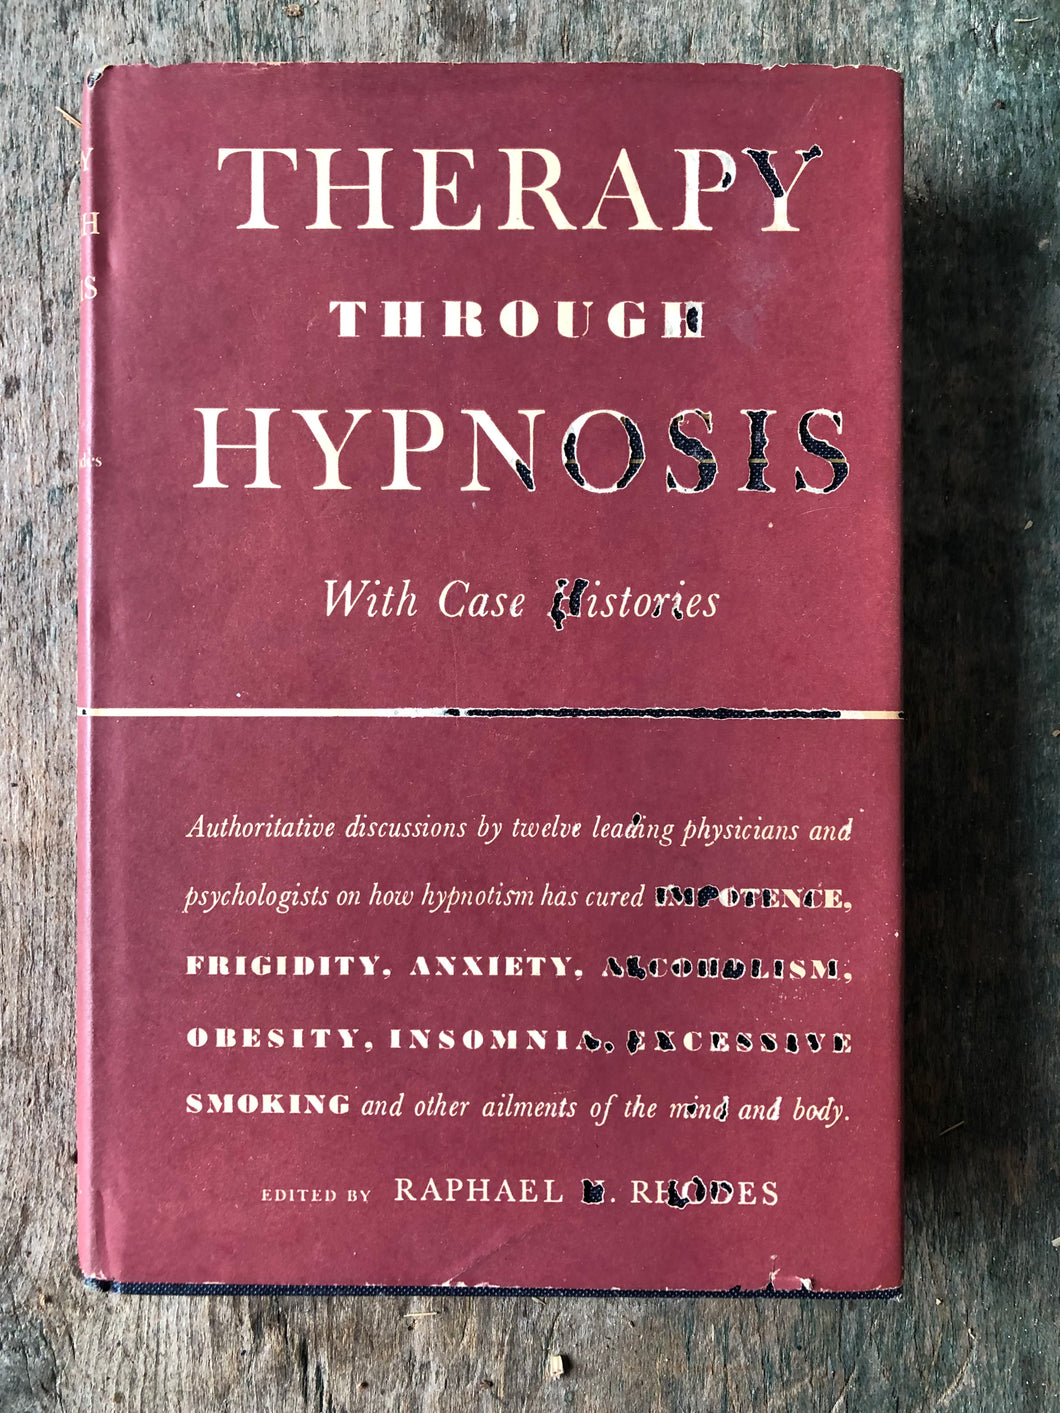 Therapy Through Hypnosis edited by Raphael H. Rhodes